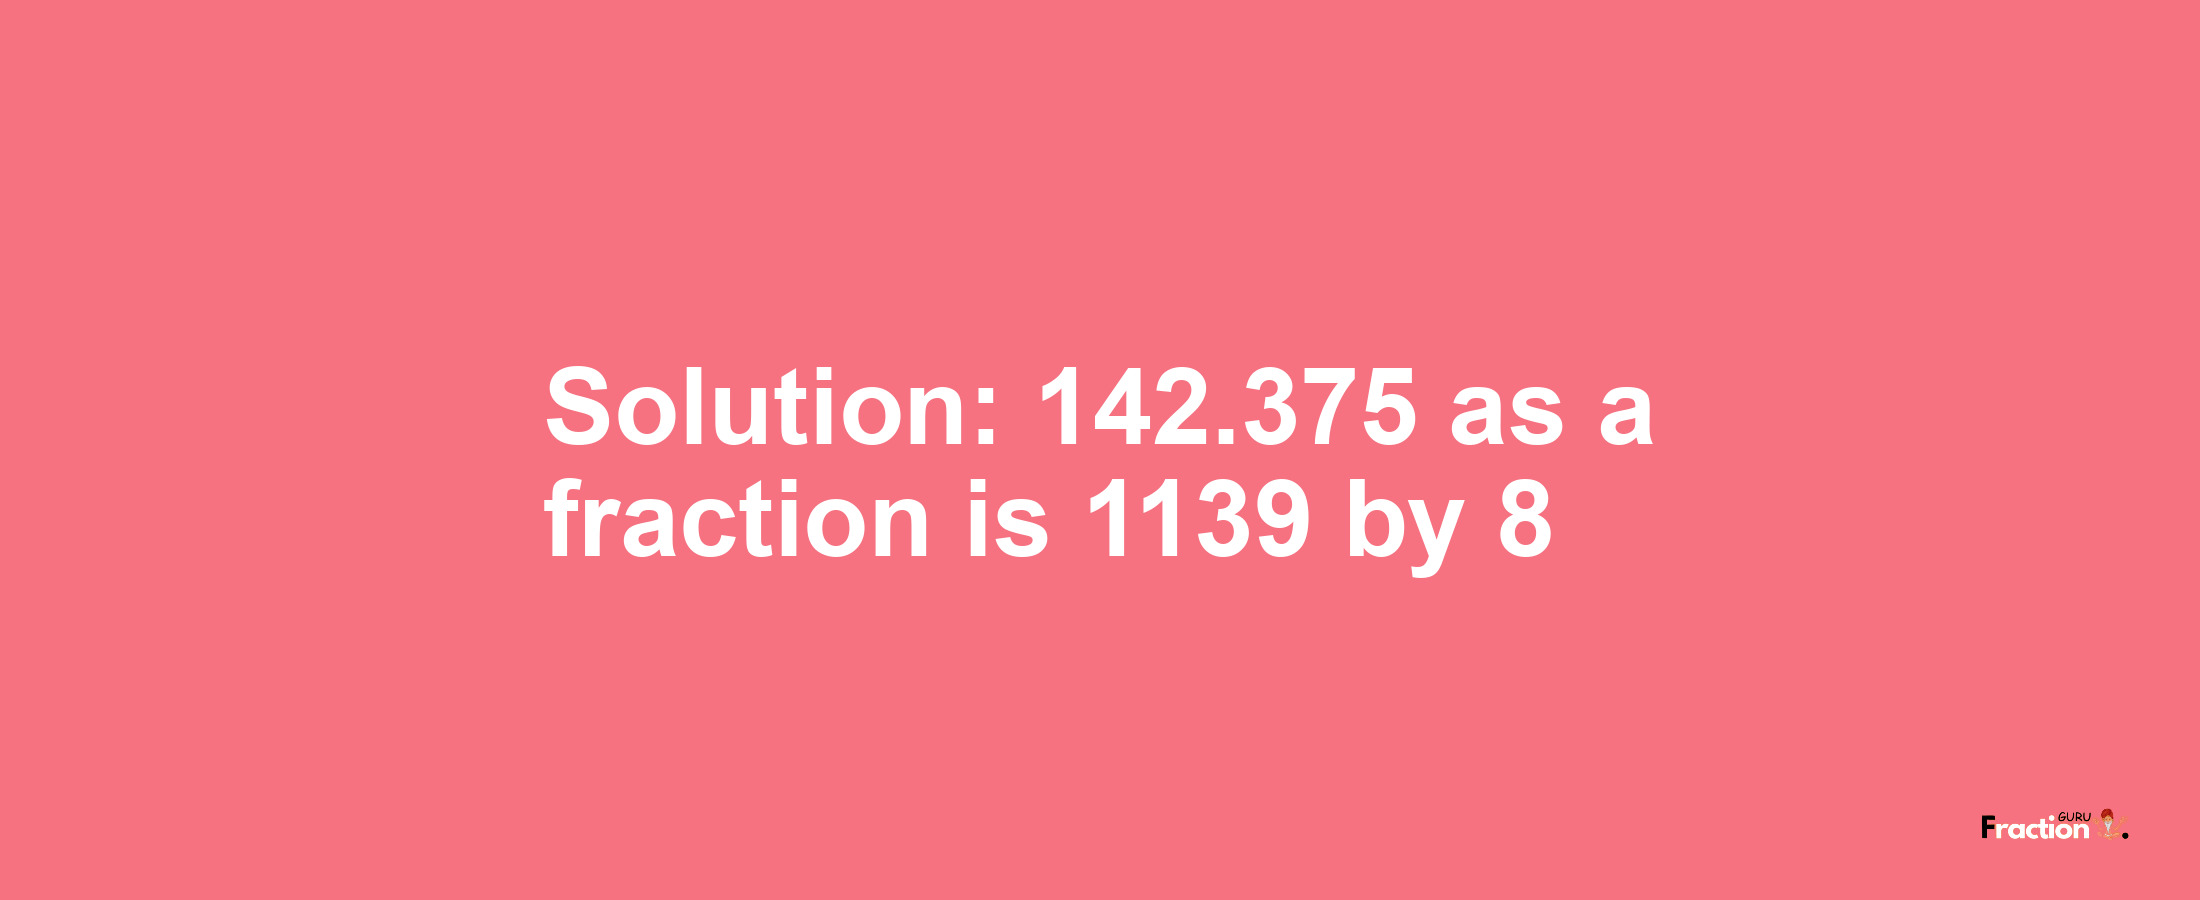 Solution:142.375 as a fraction is 1139/8